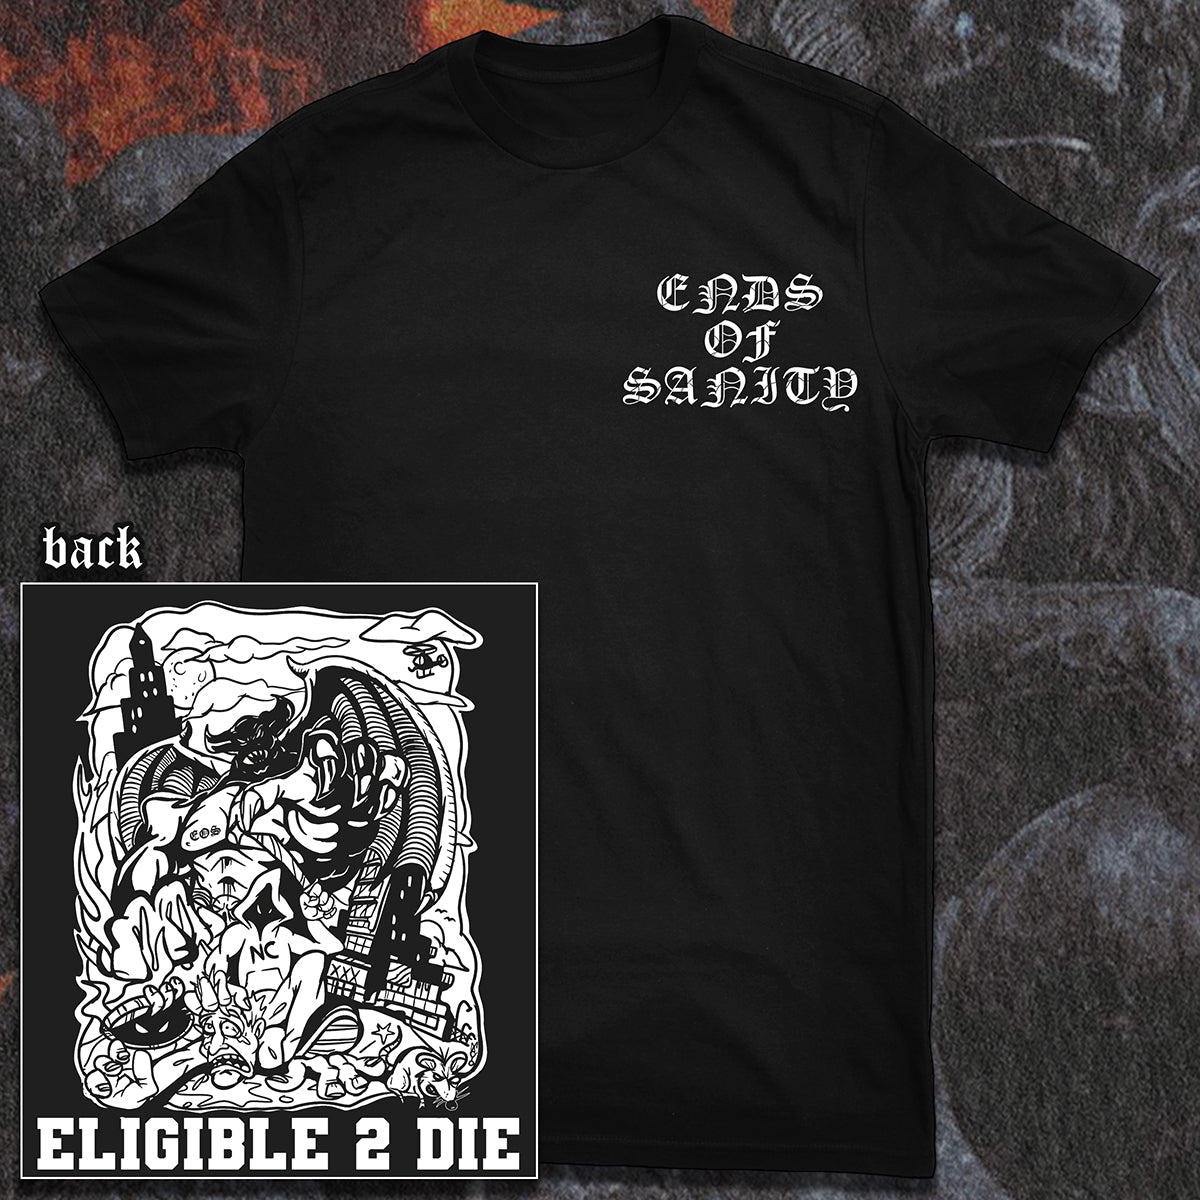 ENDS OF SANITY "ELIGIBLE 2 DIE" SHIRT